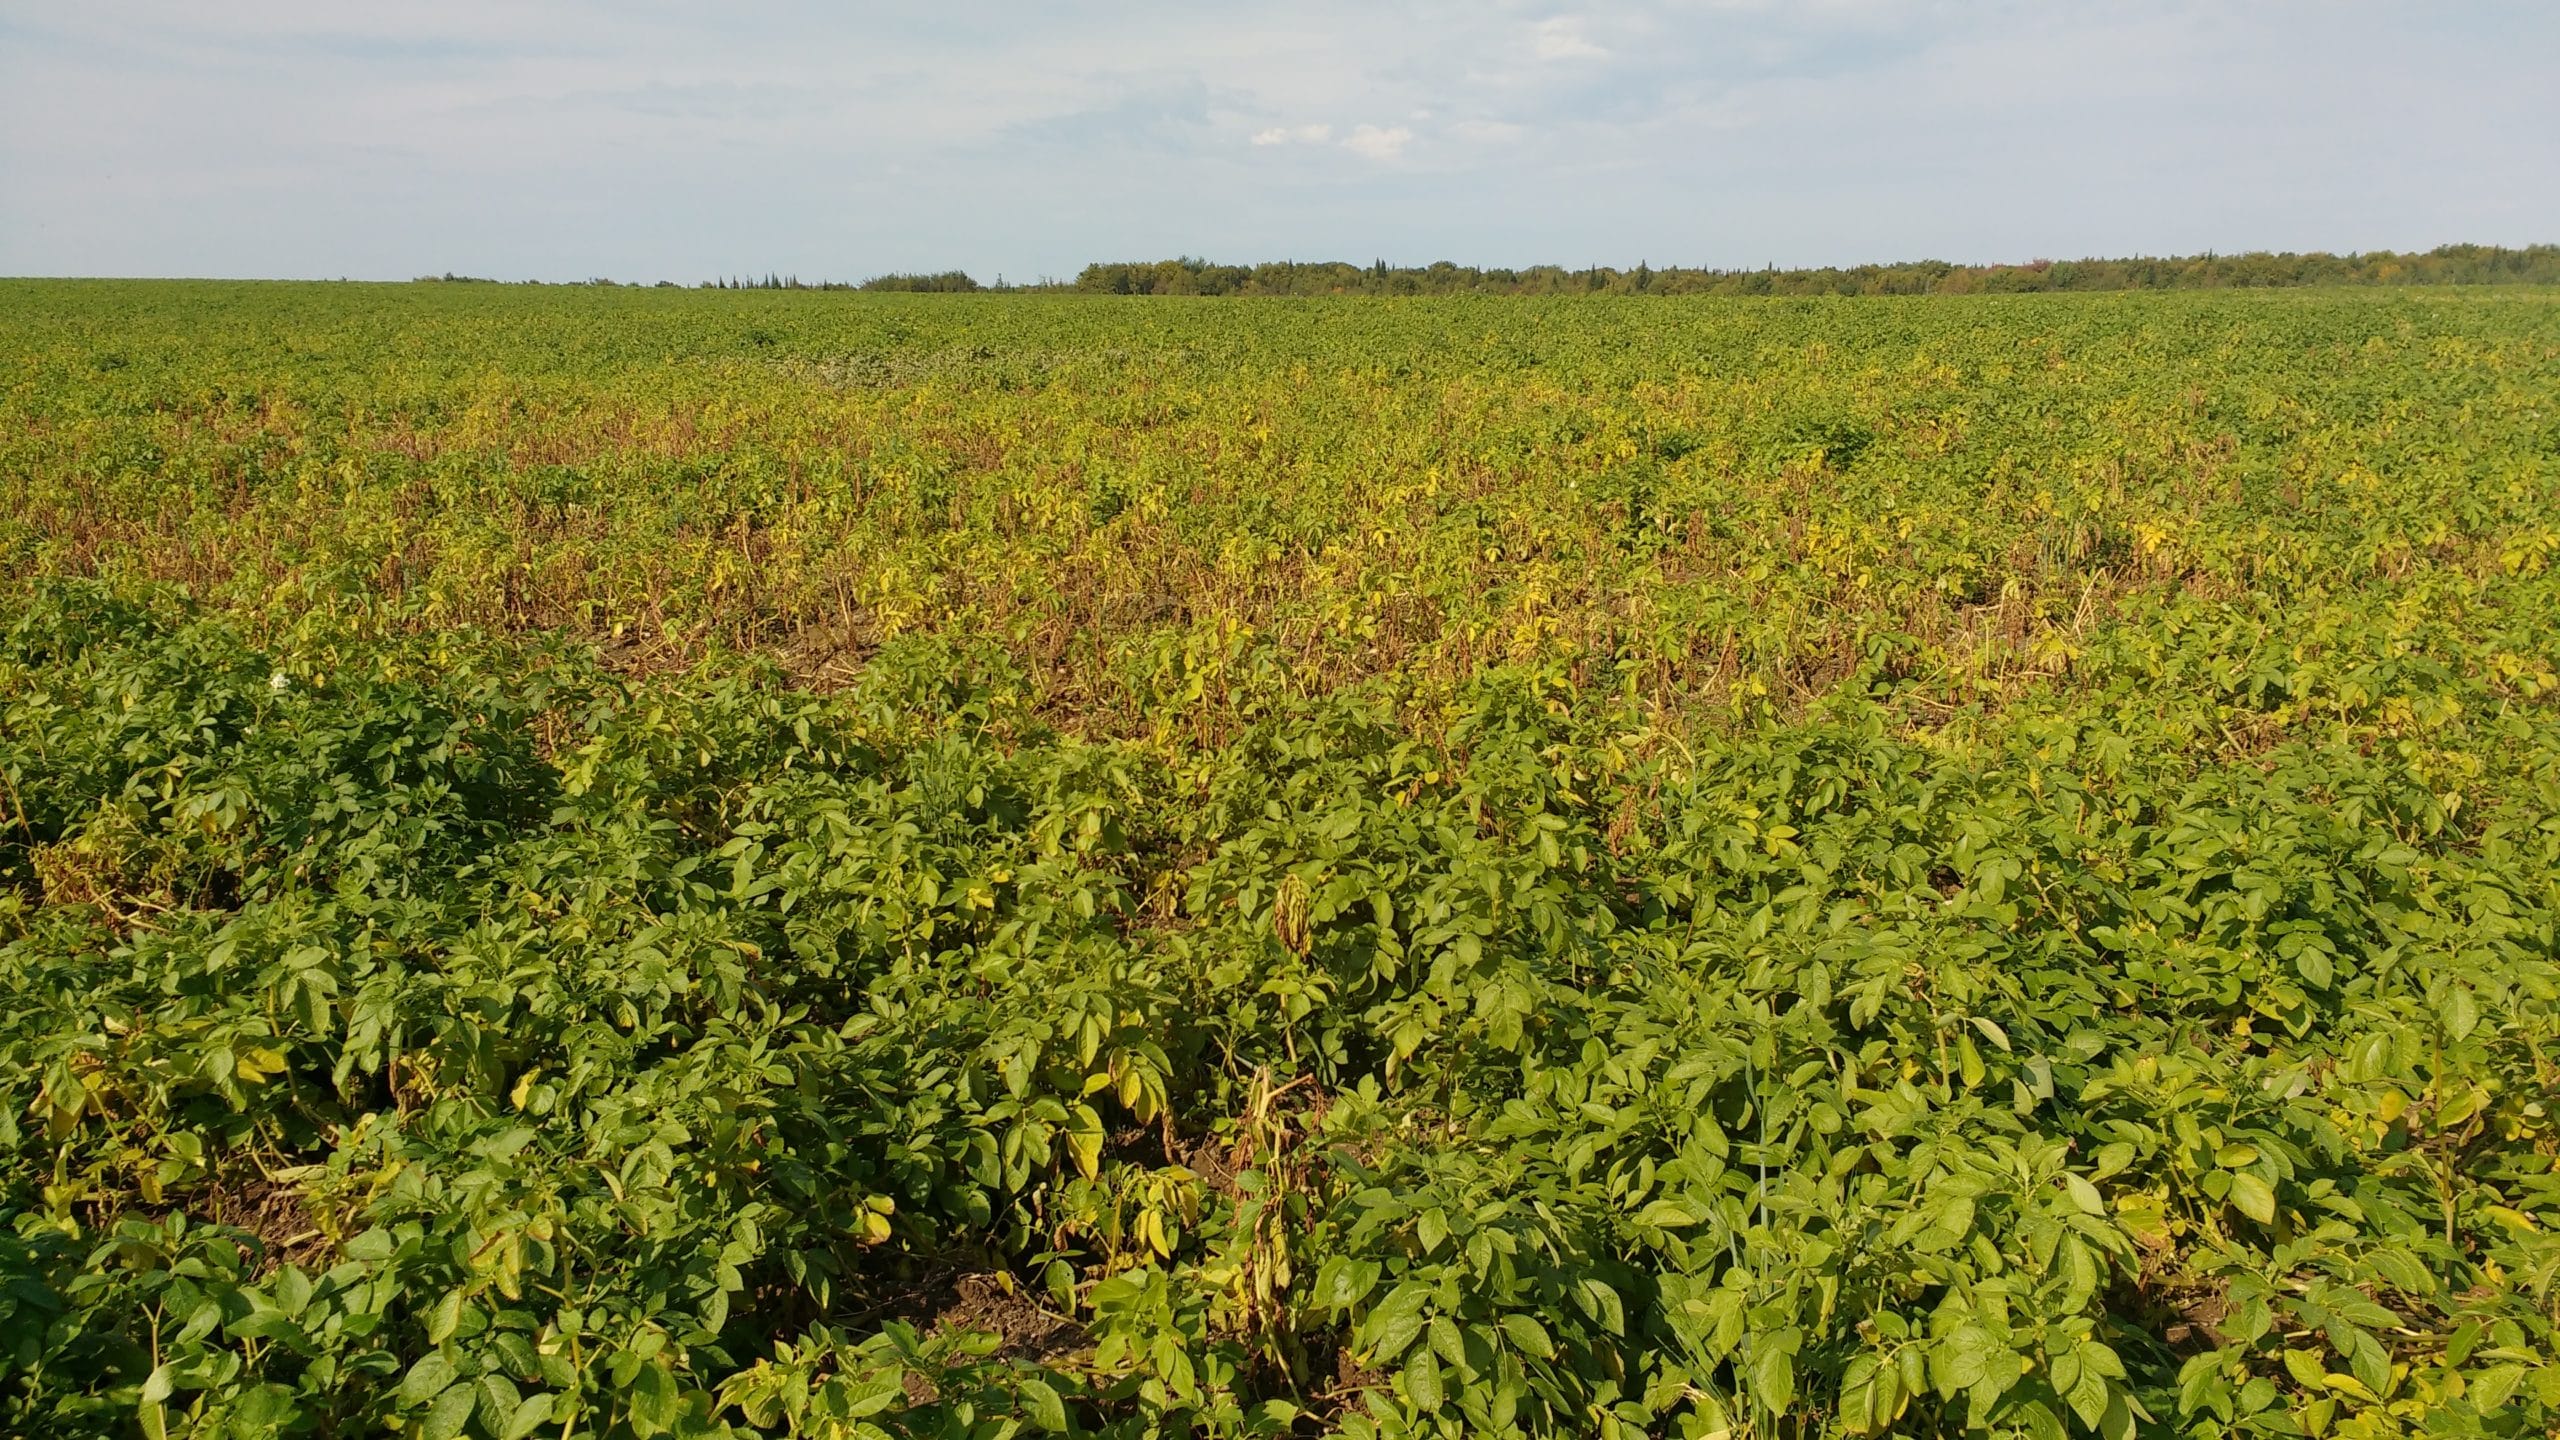 Potato field infected with Potato Early Dying disease